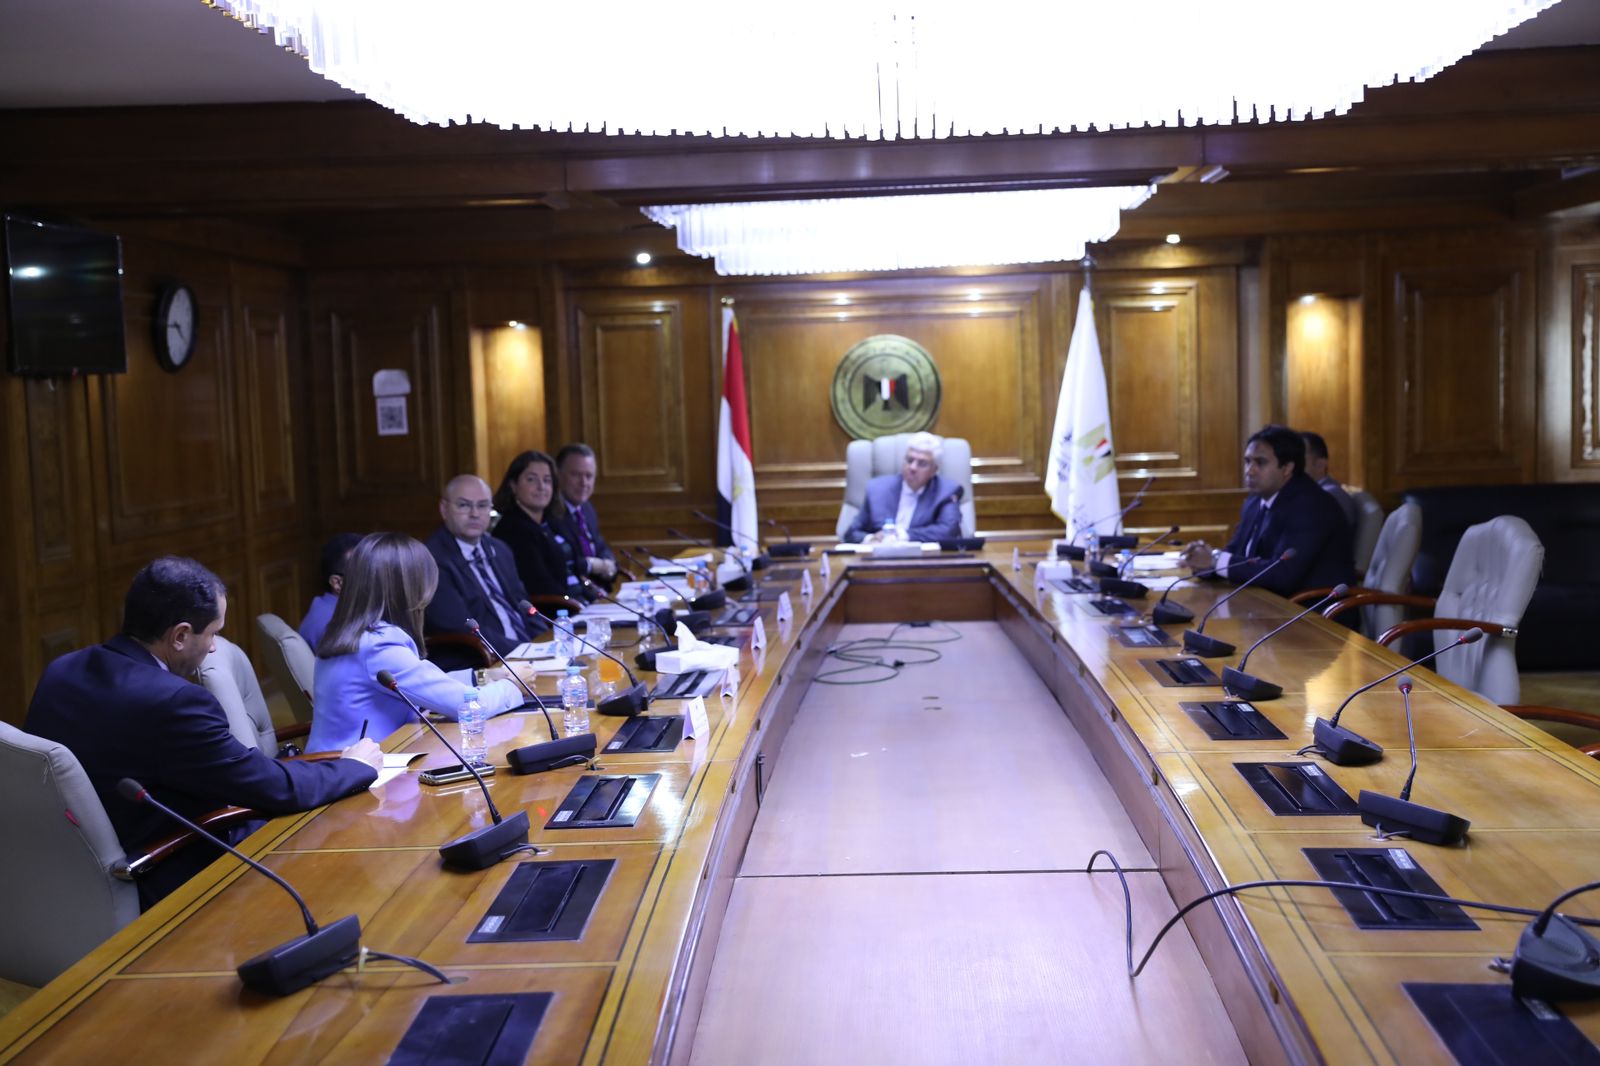 The Minister of Higher Education discusses with the USAID delegation the development of colleges of education